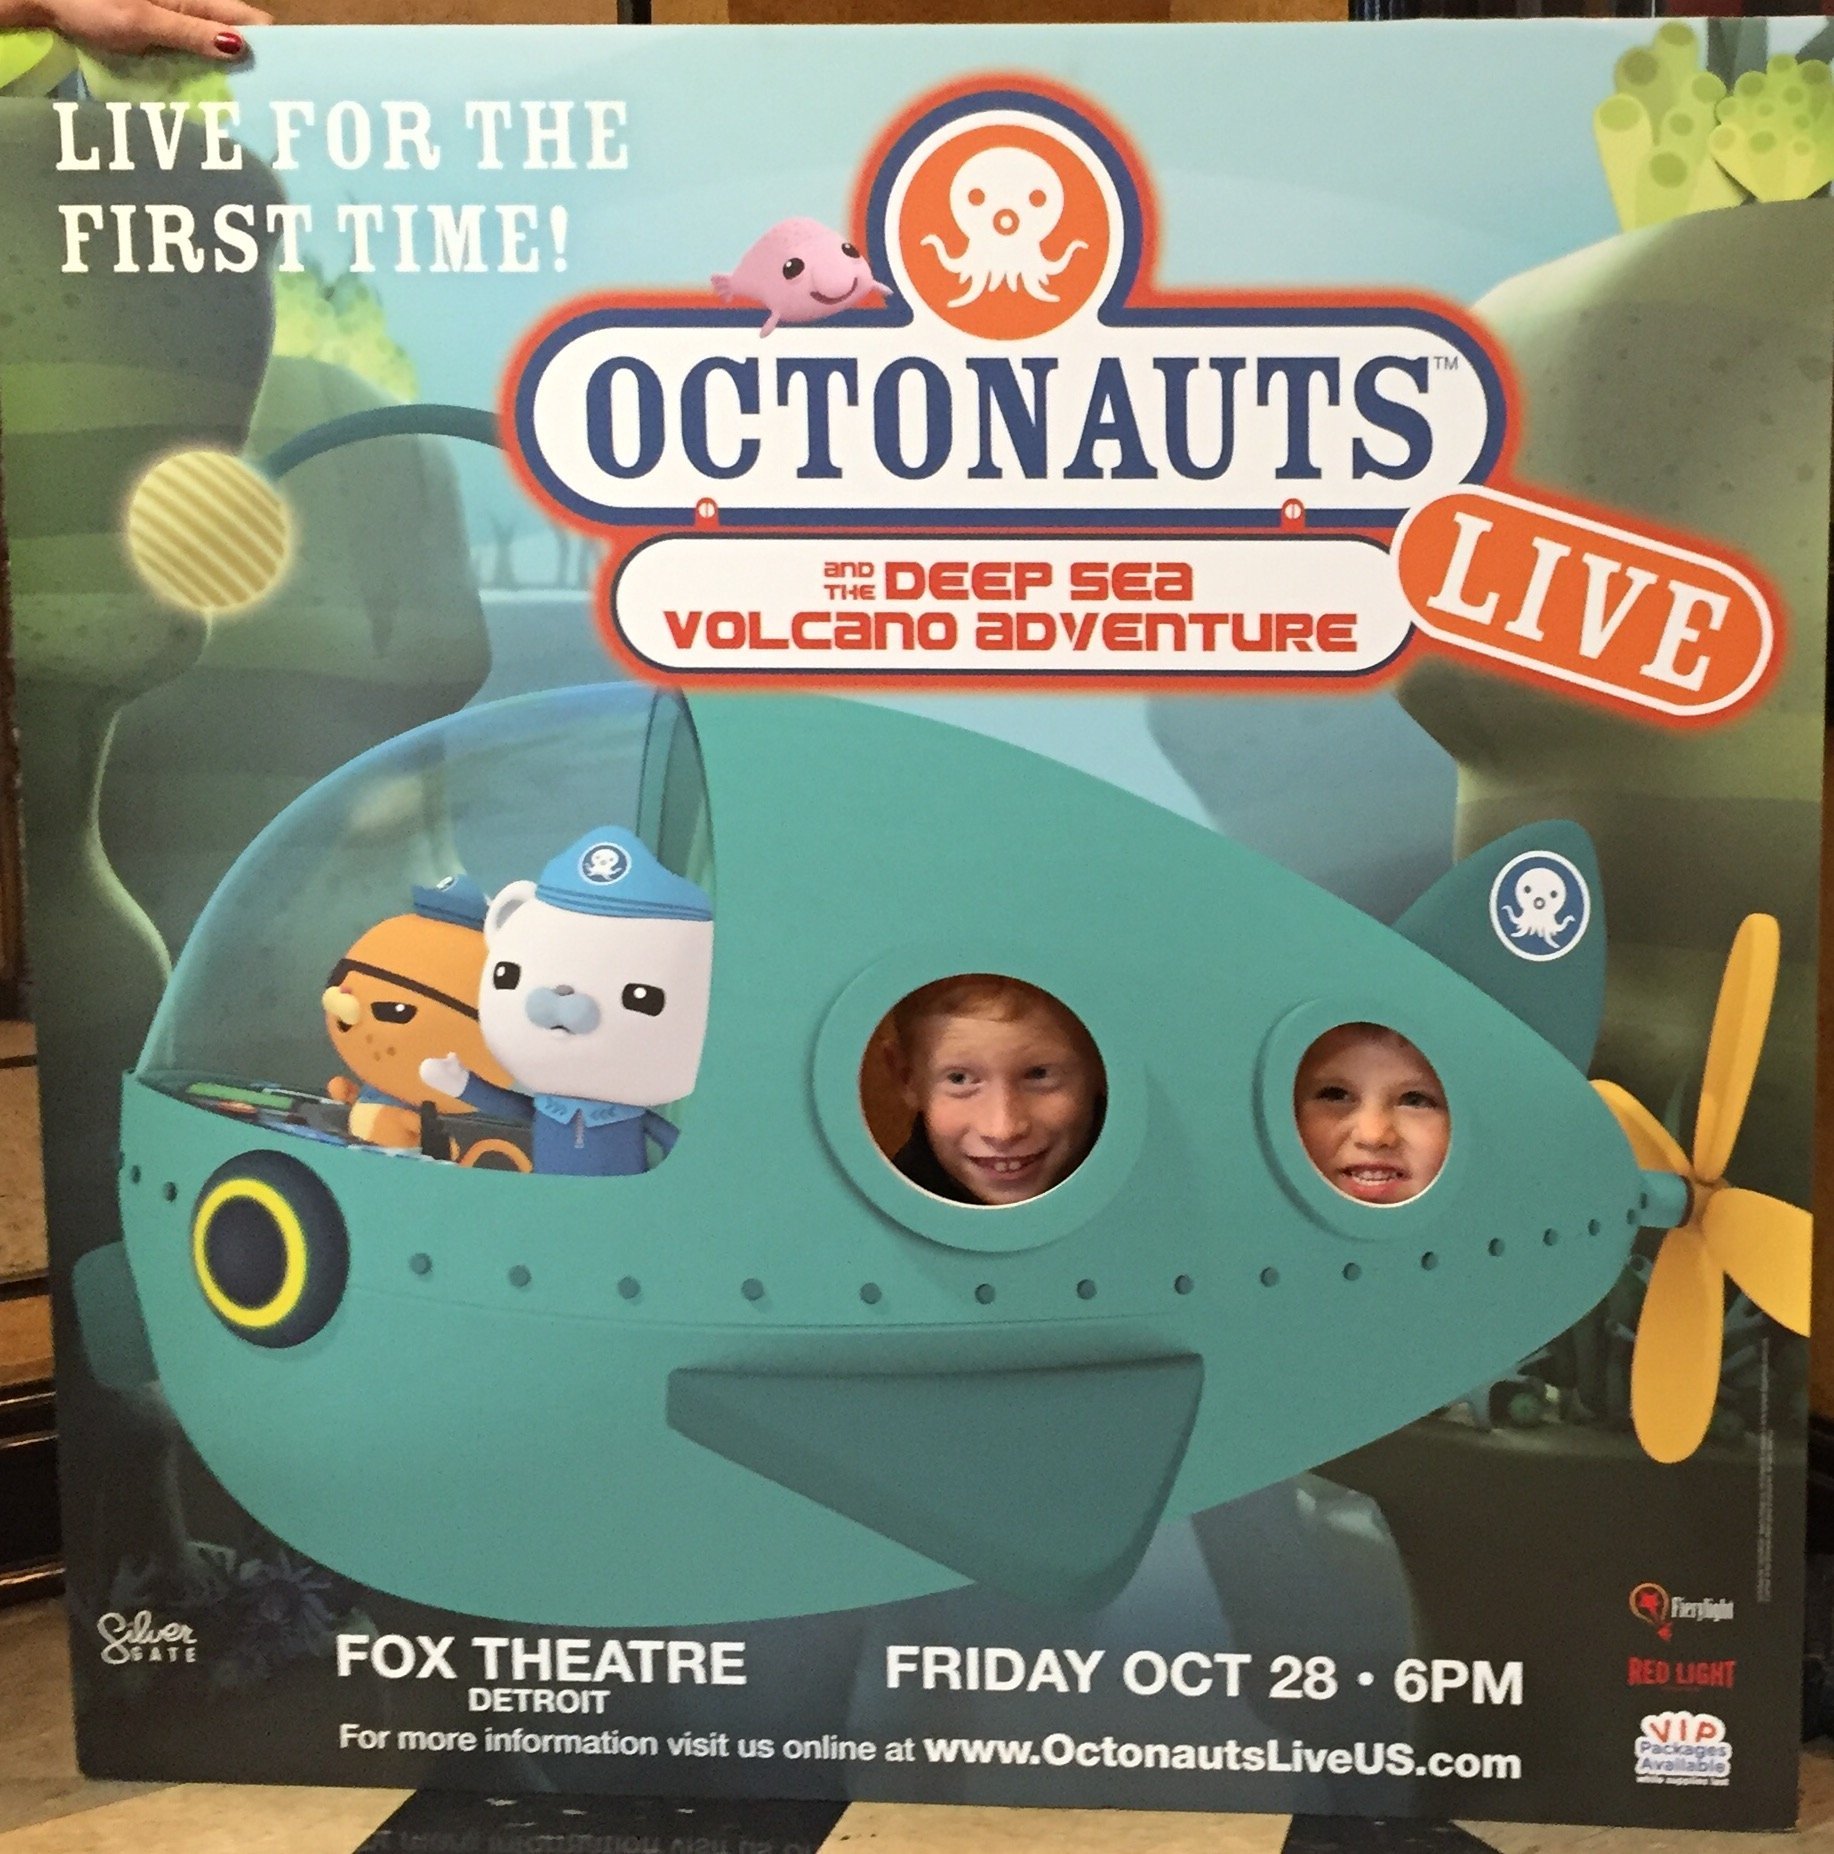 TPAC to dive into undersea adventures with Octonauts Live!